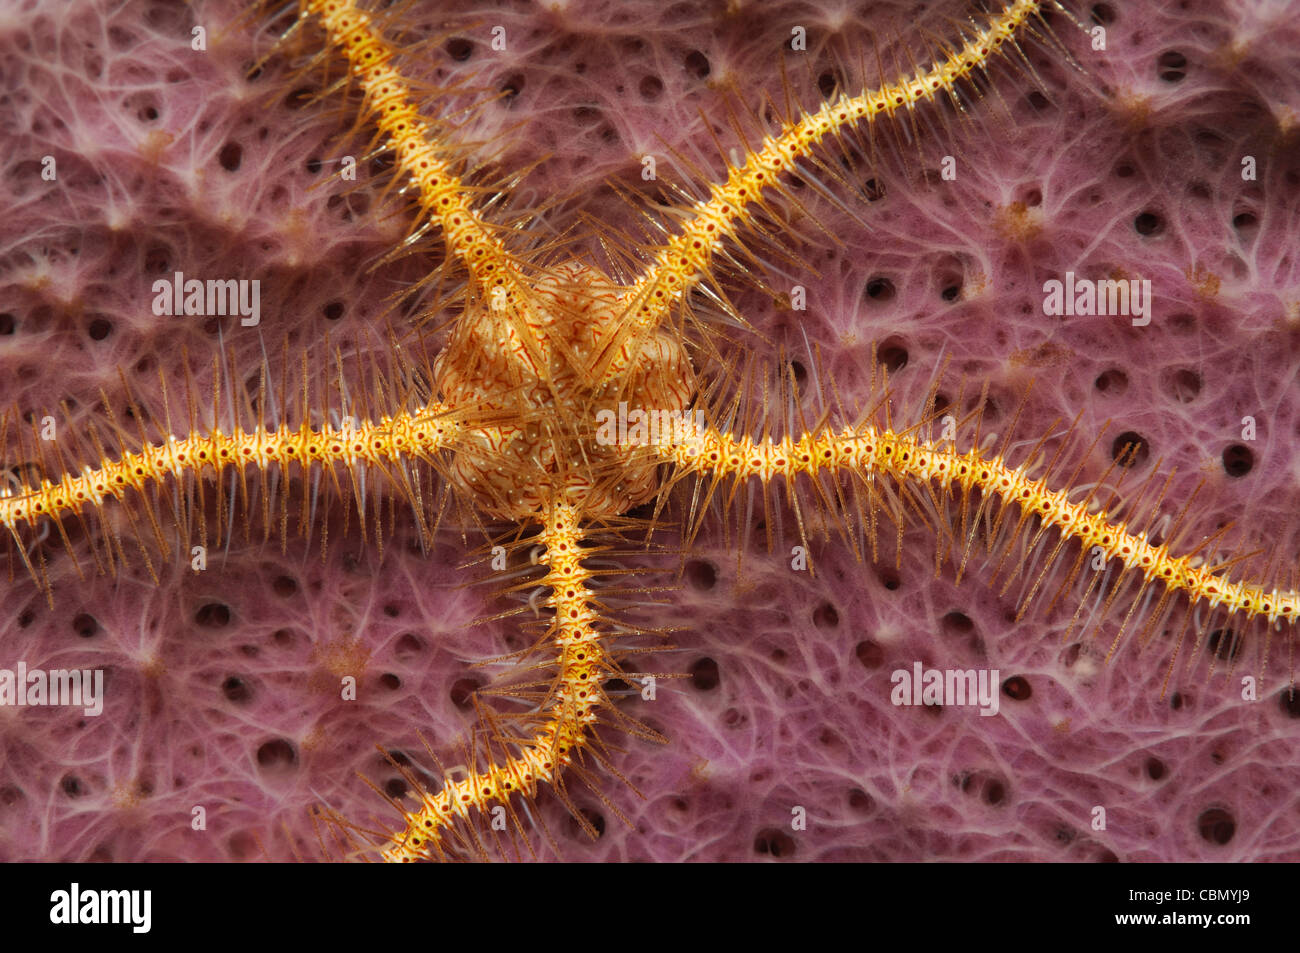 Brittle Star on pink Sponge, Ophiothrix sp., Lembeh Strait, North Sulawesi, Indonesia Stock Photo